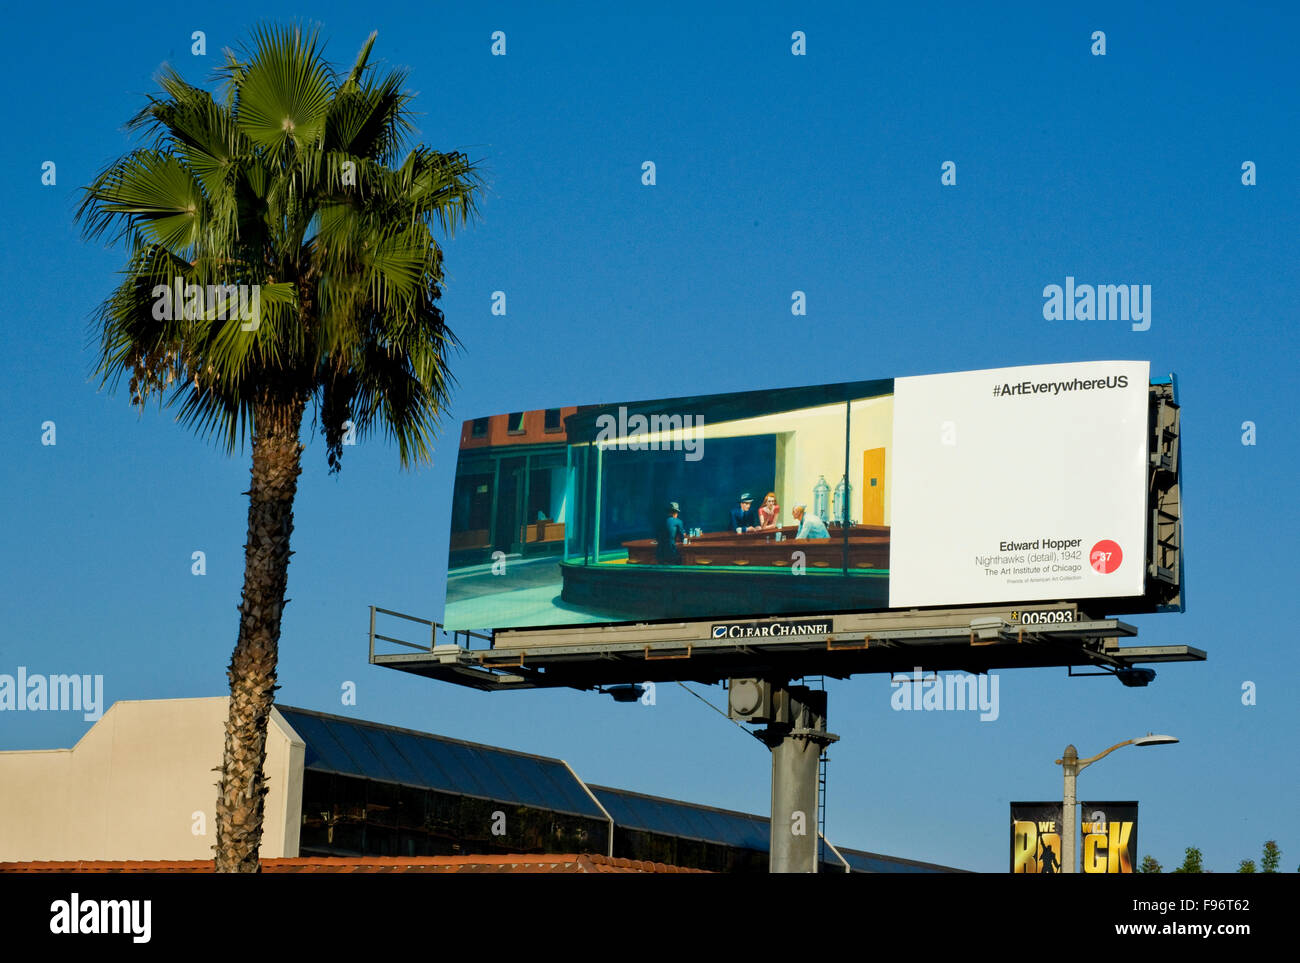 An Edward Hopper fine art painting is reproduced on a billboard in Los Angeles, California during the Art Everywhere event. Stock Photo